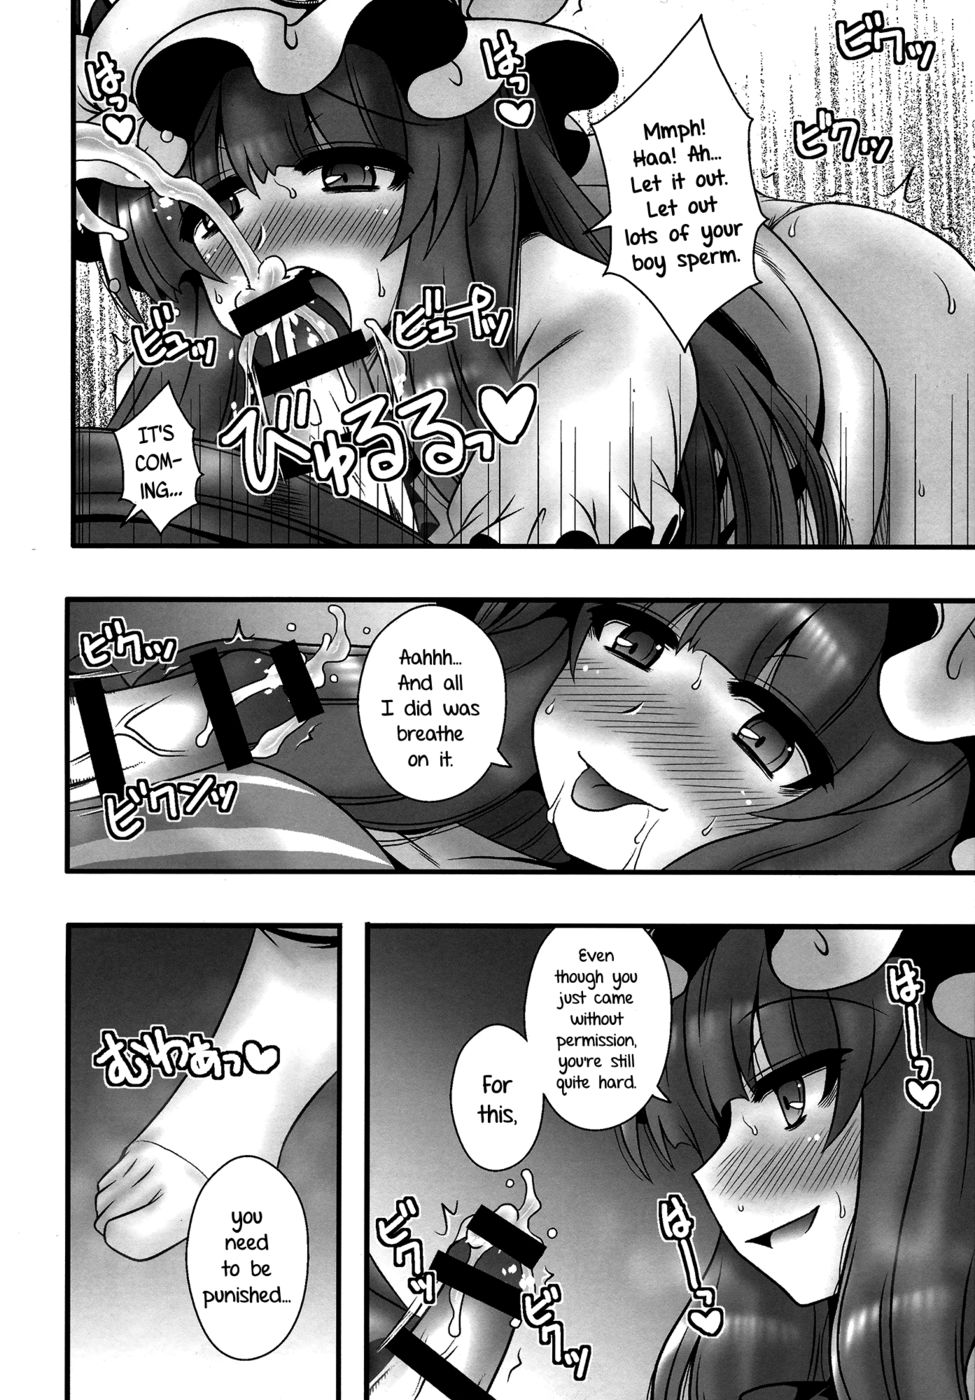 Hentai Manga Comic-The Tale of Patchouli's Reverse Rape of a Young Boy-Read-7